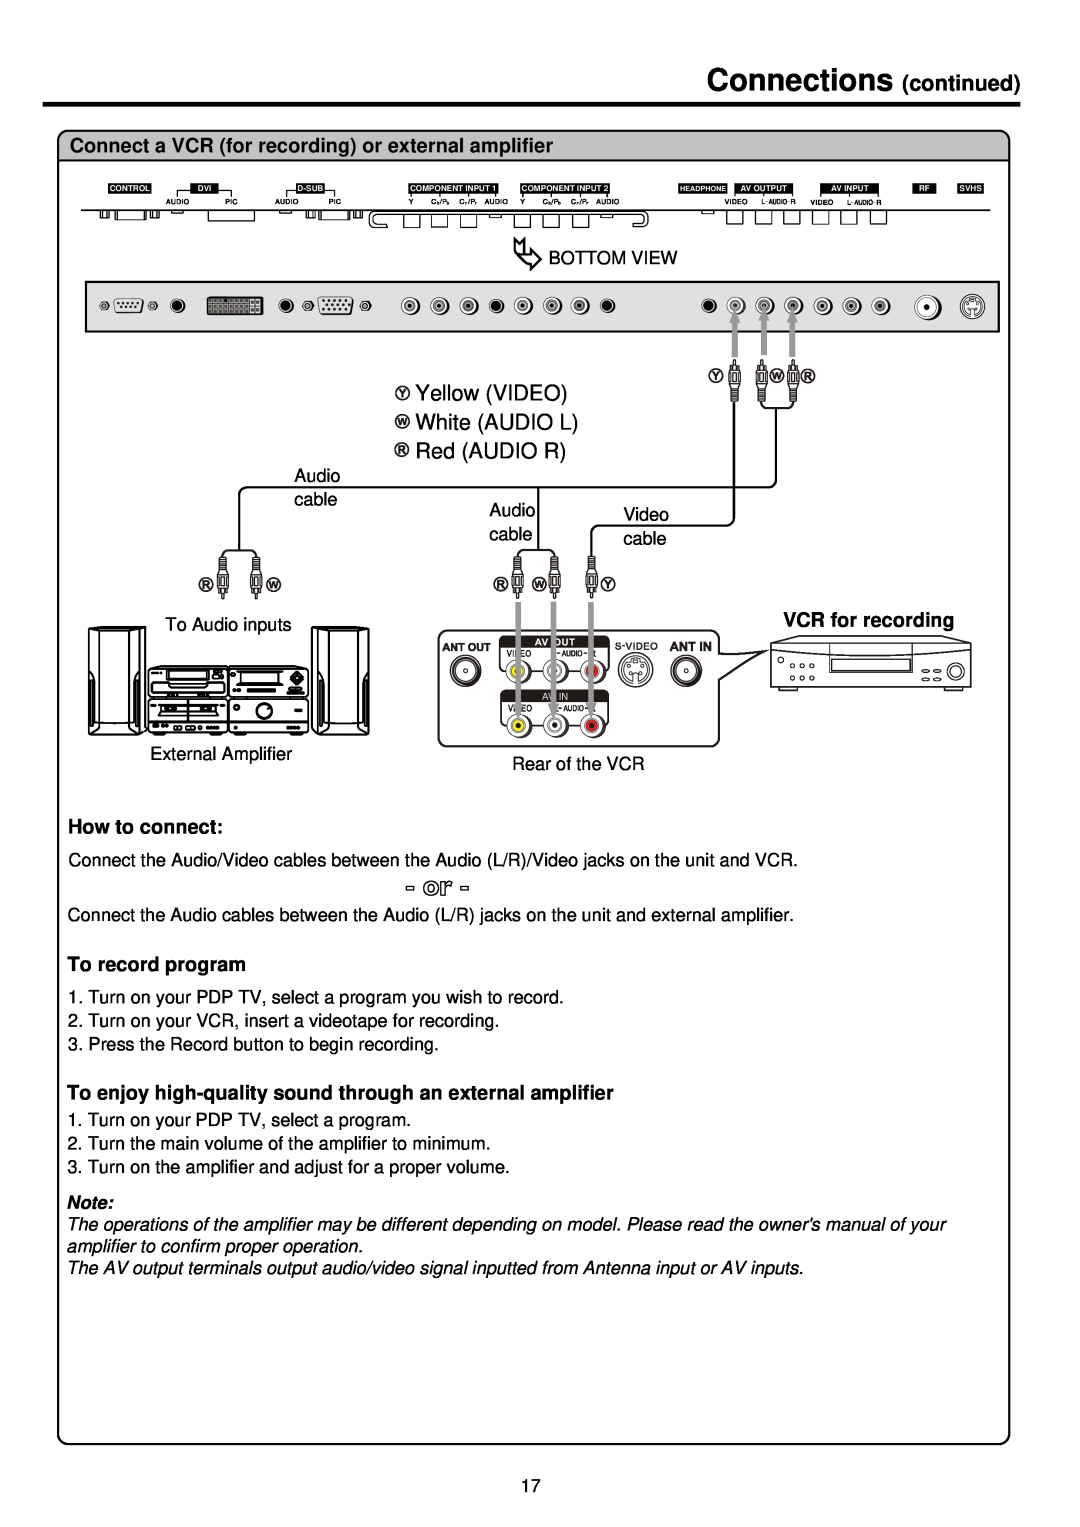 Palsonic PDP4200 owner manual Connect a VCR for recording or external amplifier, To record program, Connections continued 